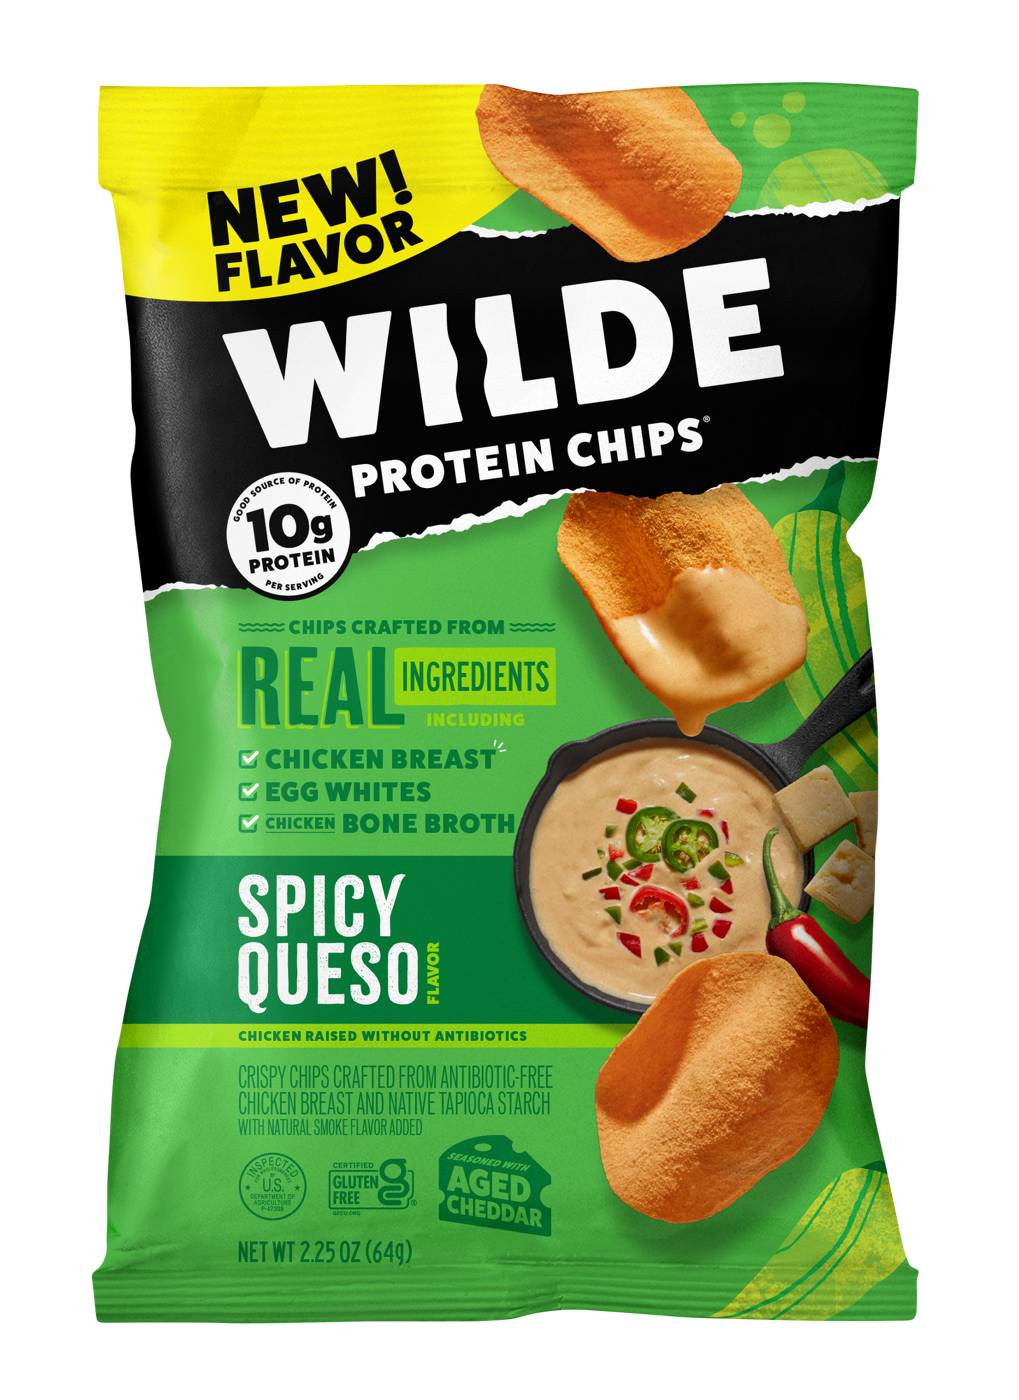 WILDE Protein Chips - Spicy Queso; image 1 of 2